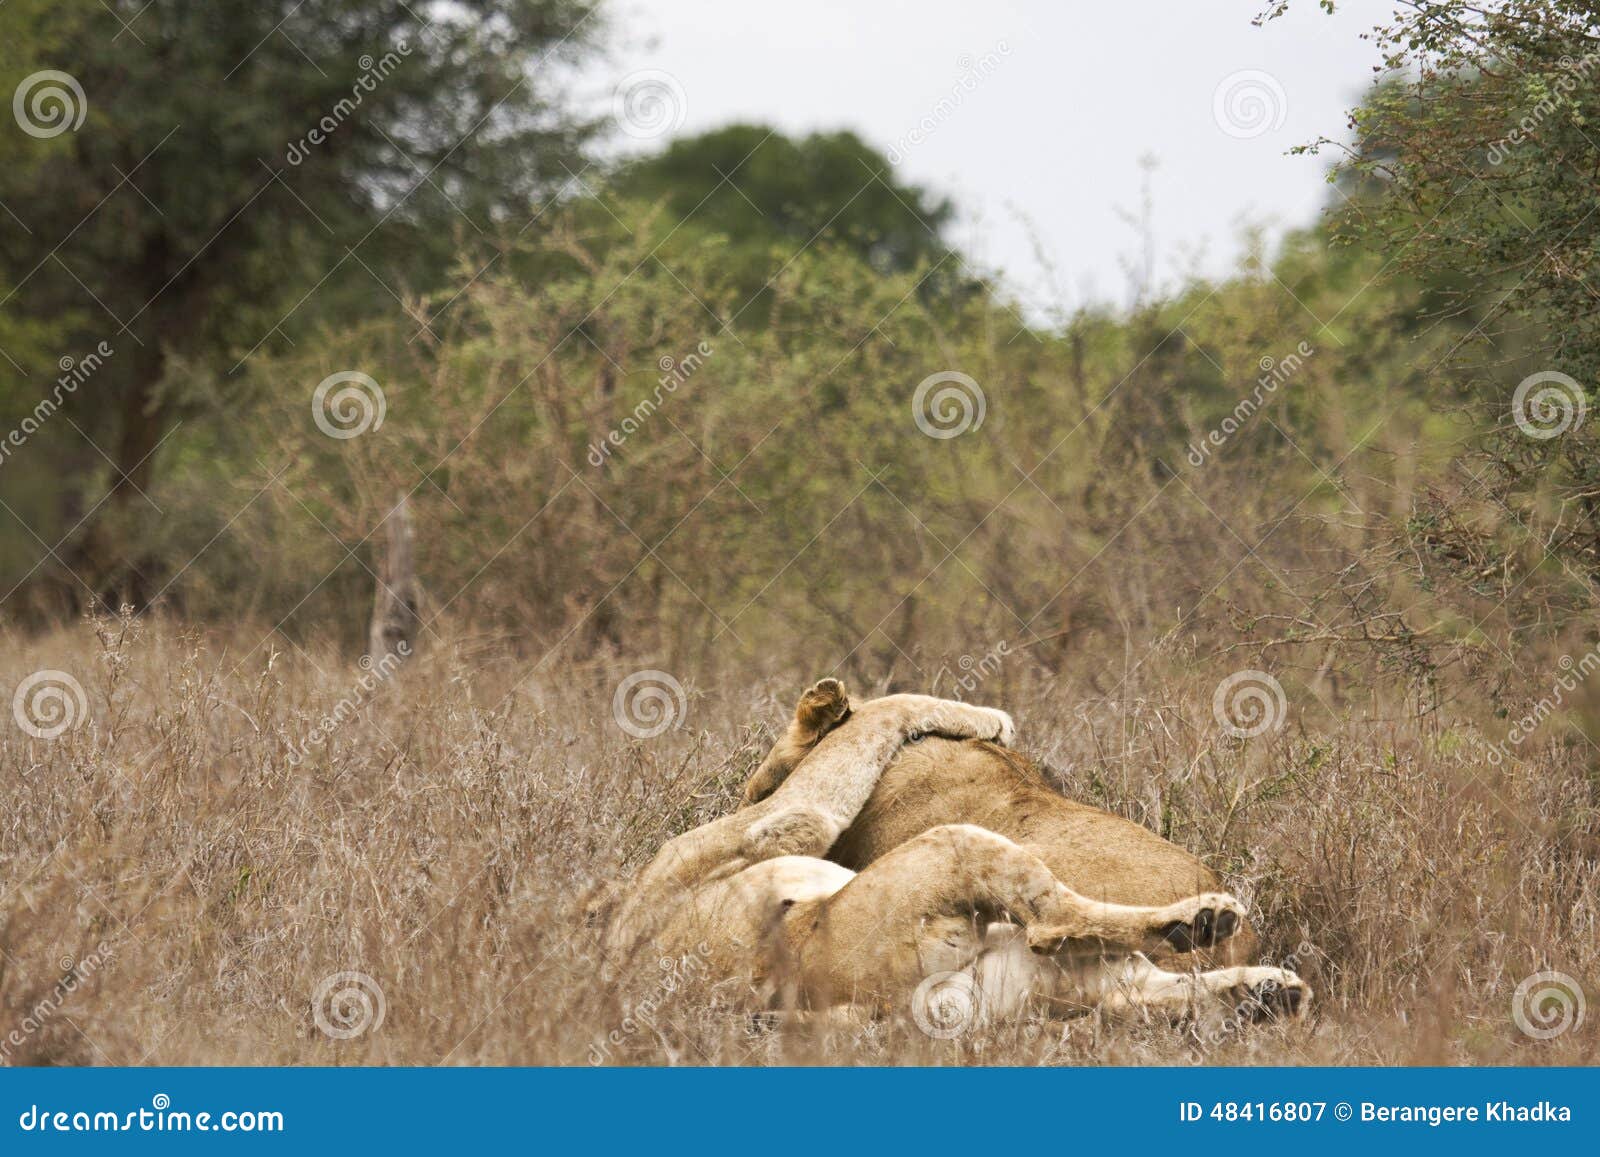 two lions male and female caress and hug each other